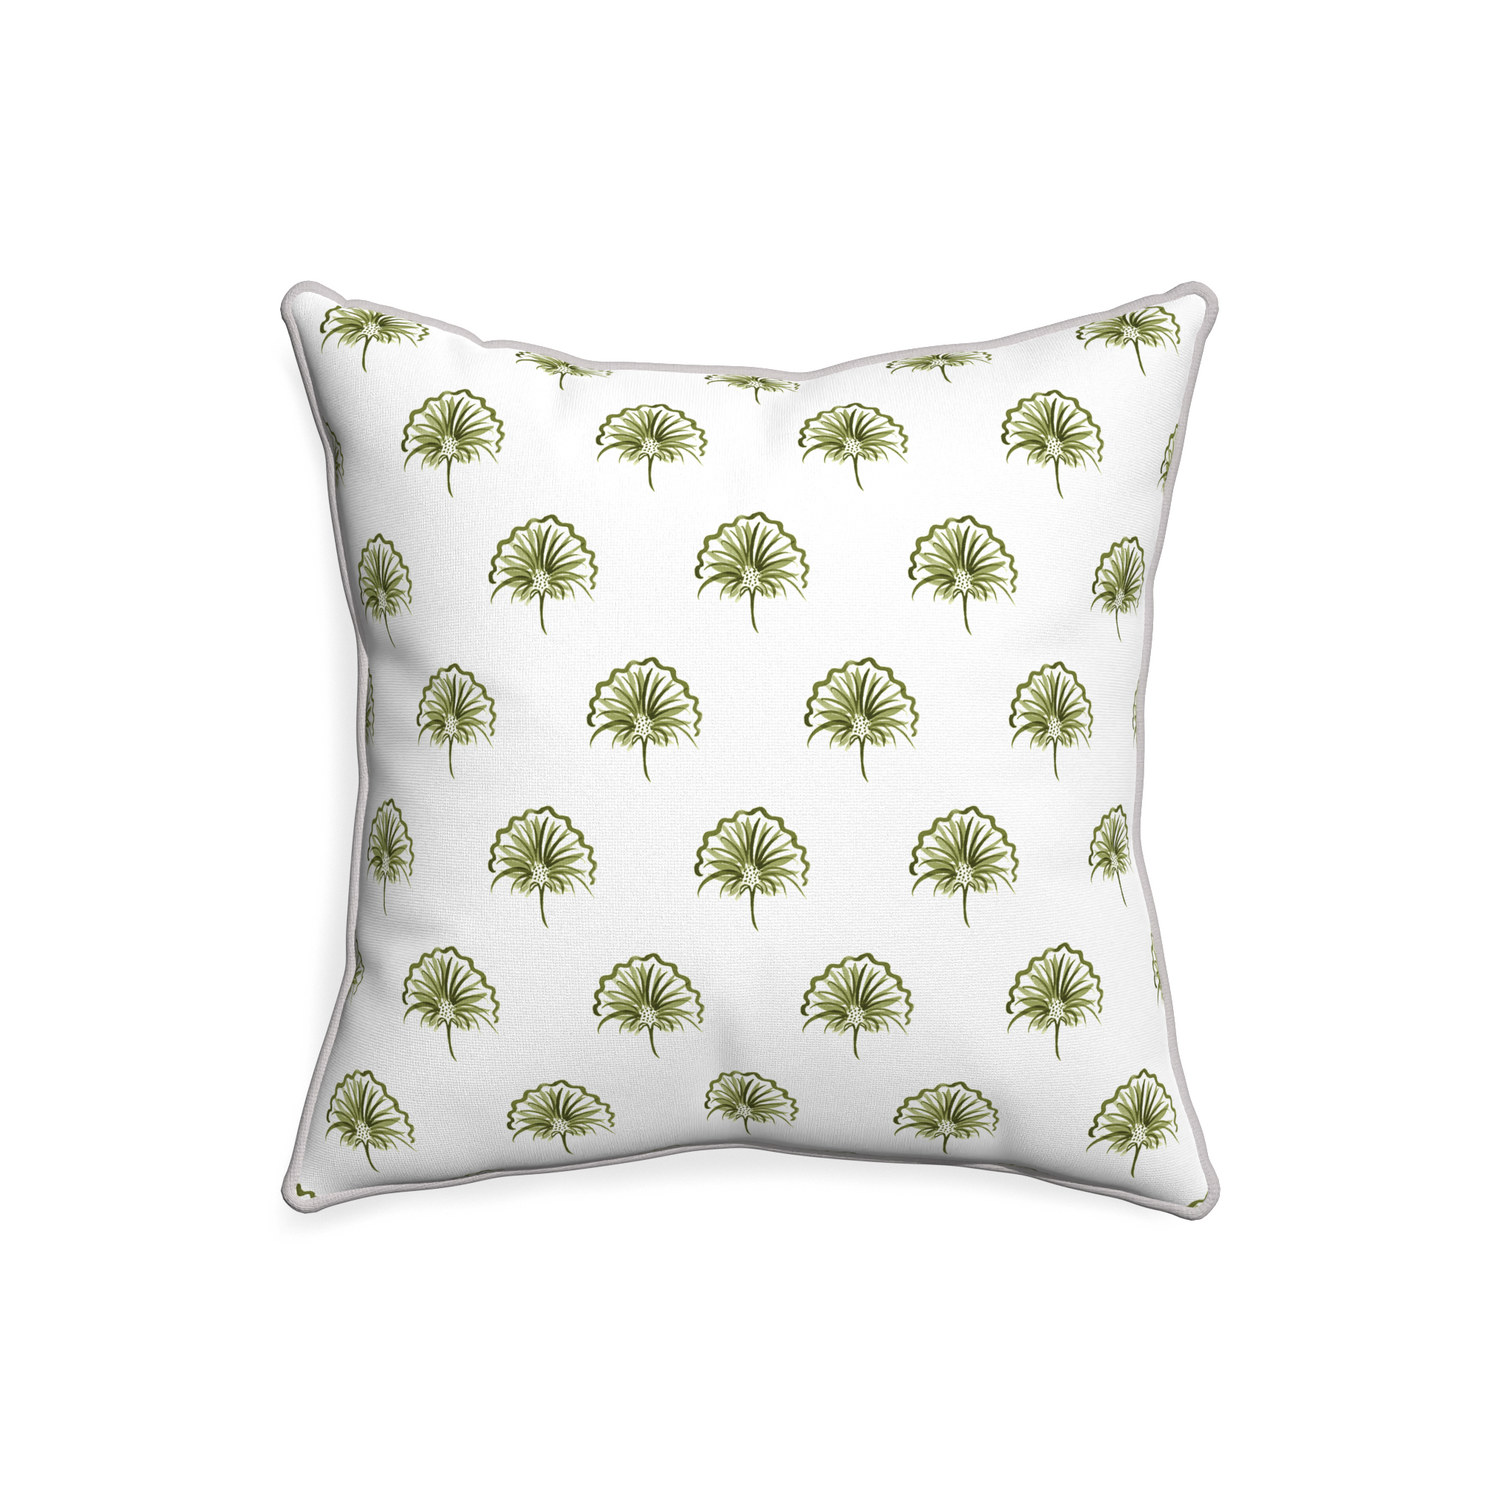 20-square penelope moss custom pillow with pebble piping on white background